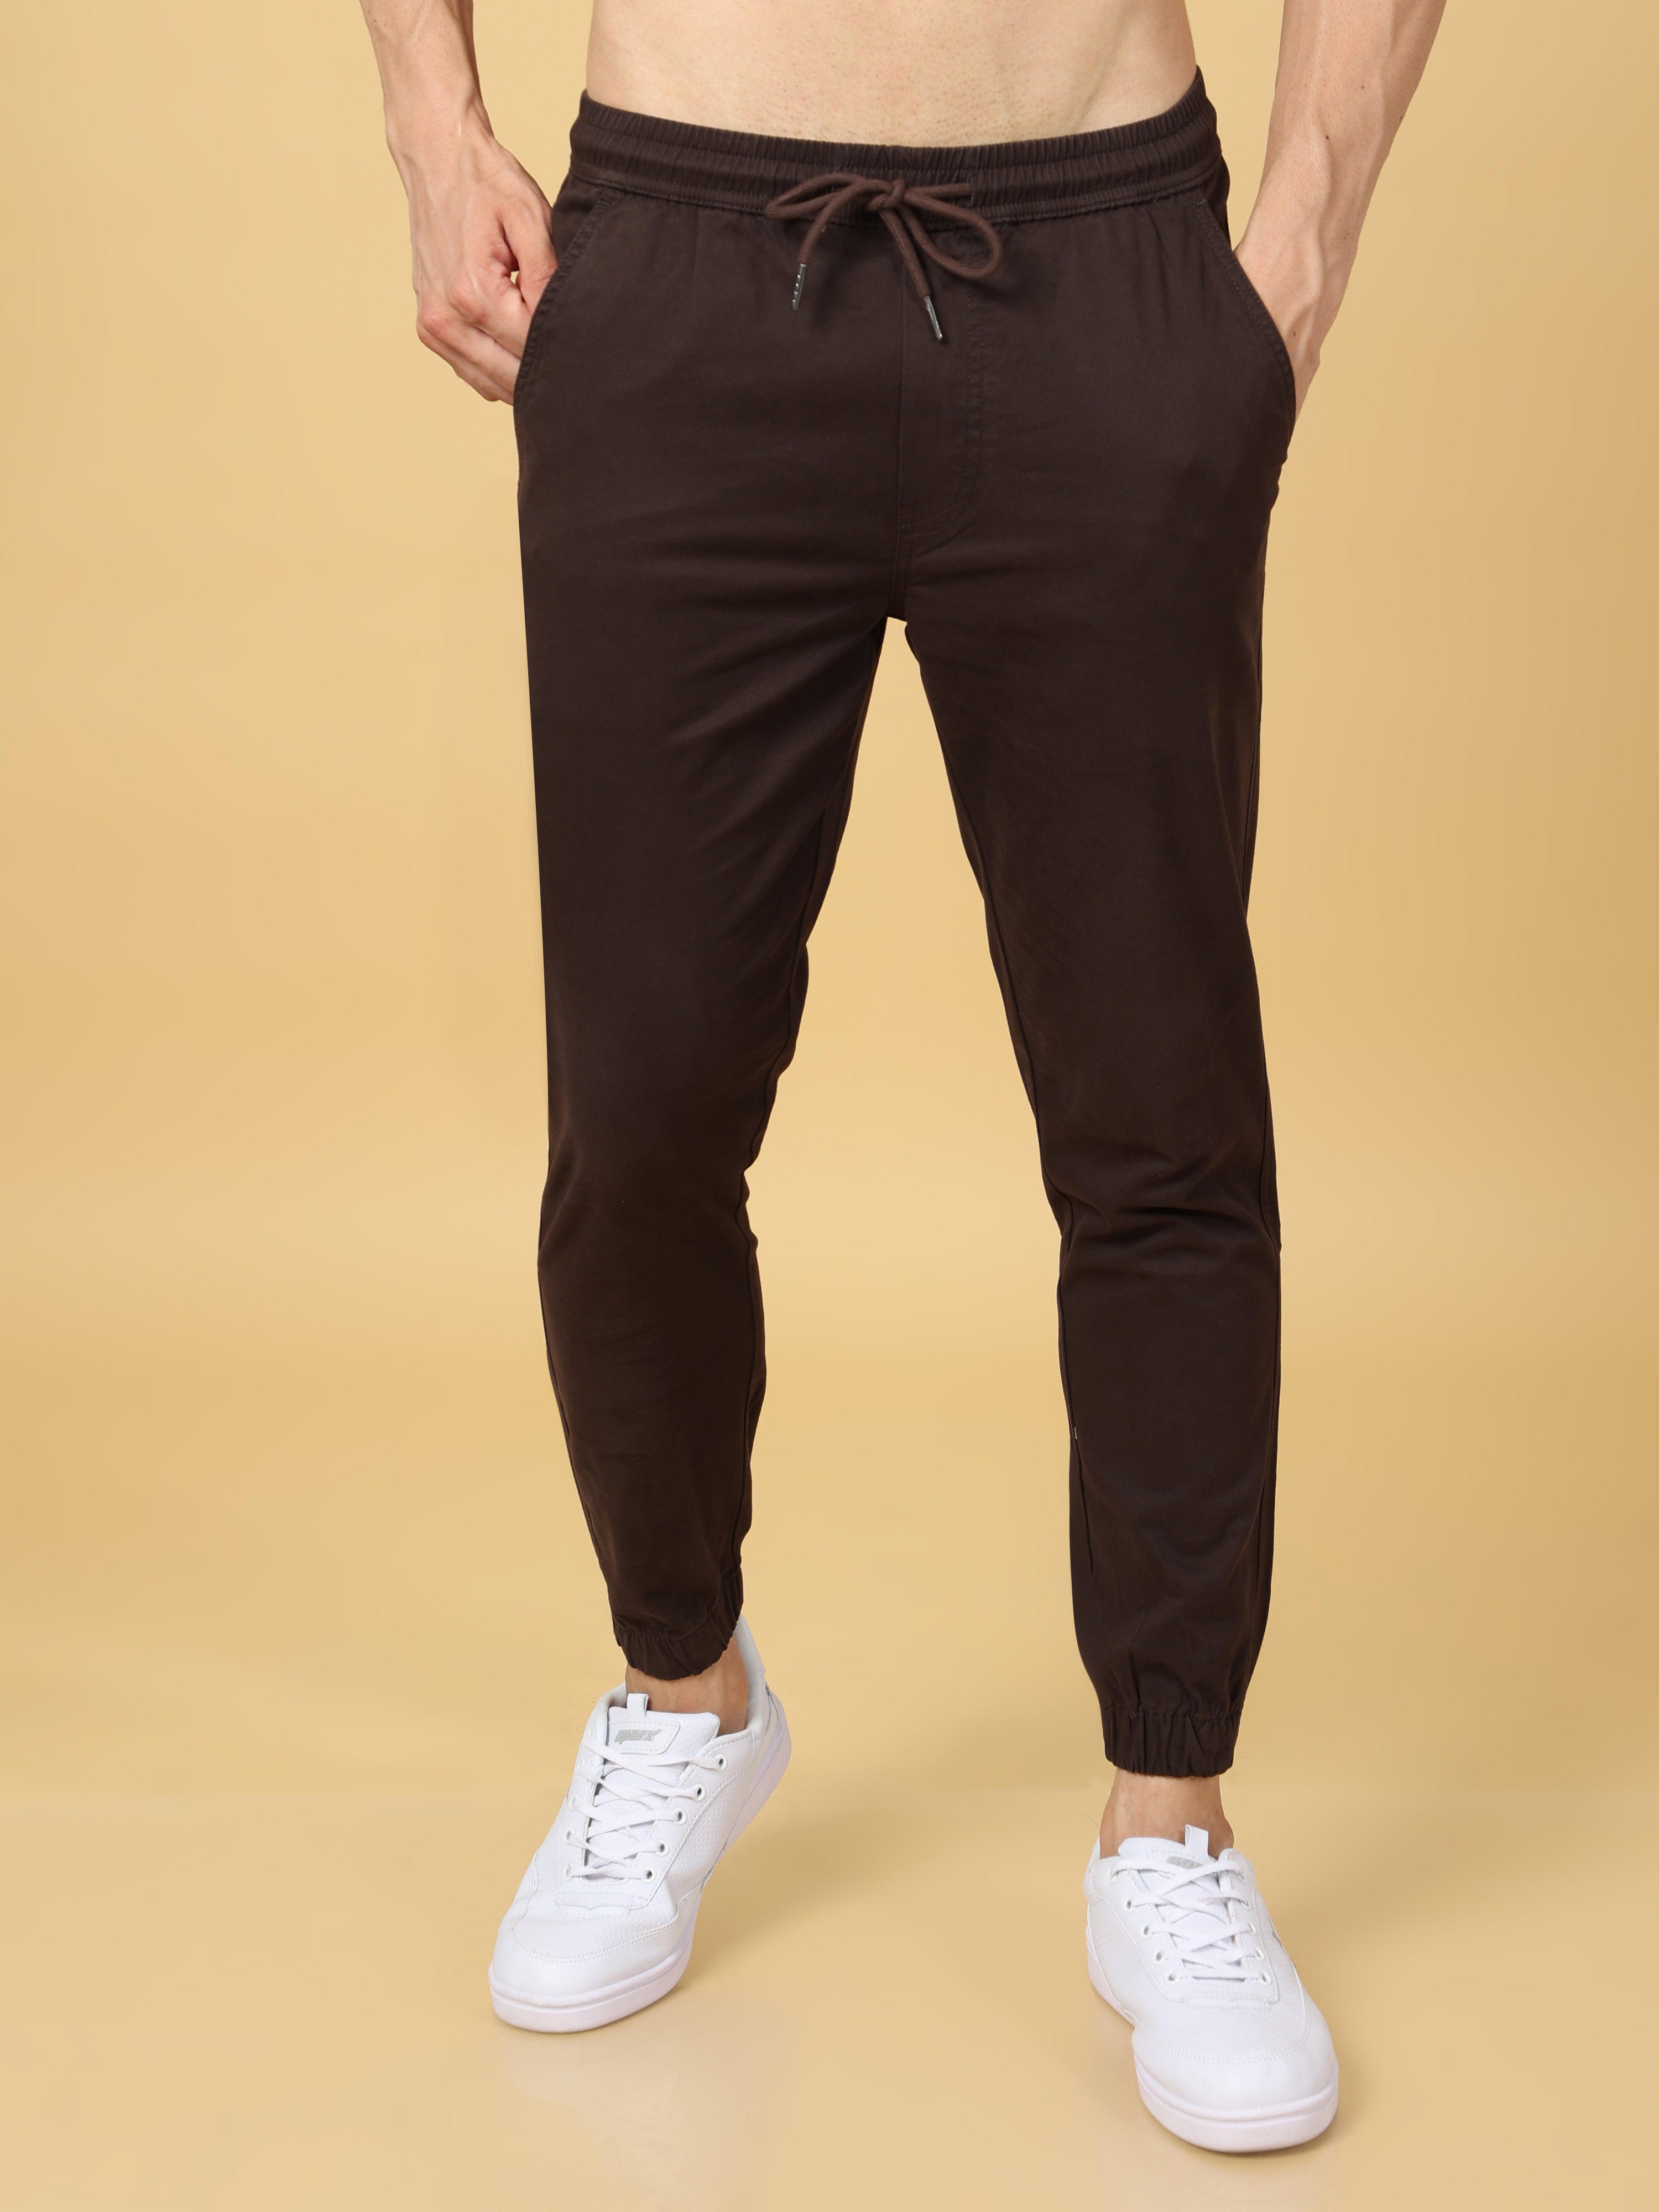 Dark Brown High Rise Tapered Fit Pants